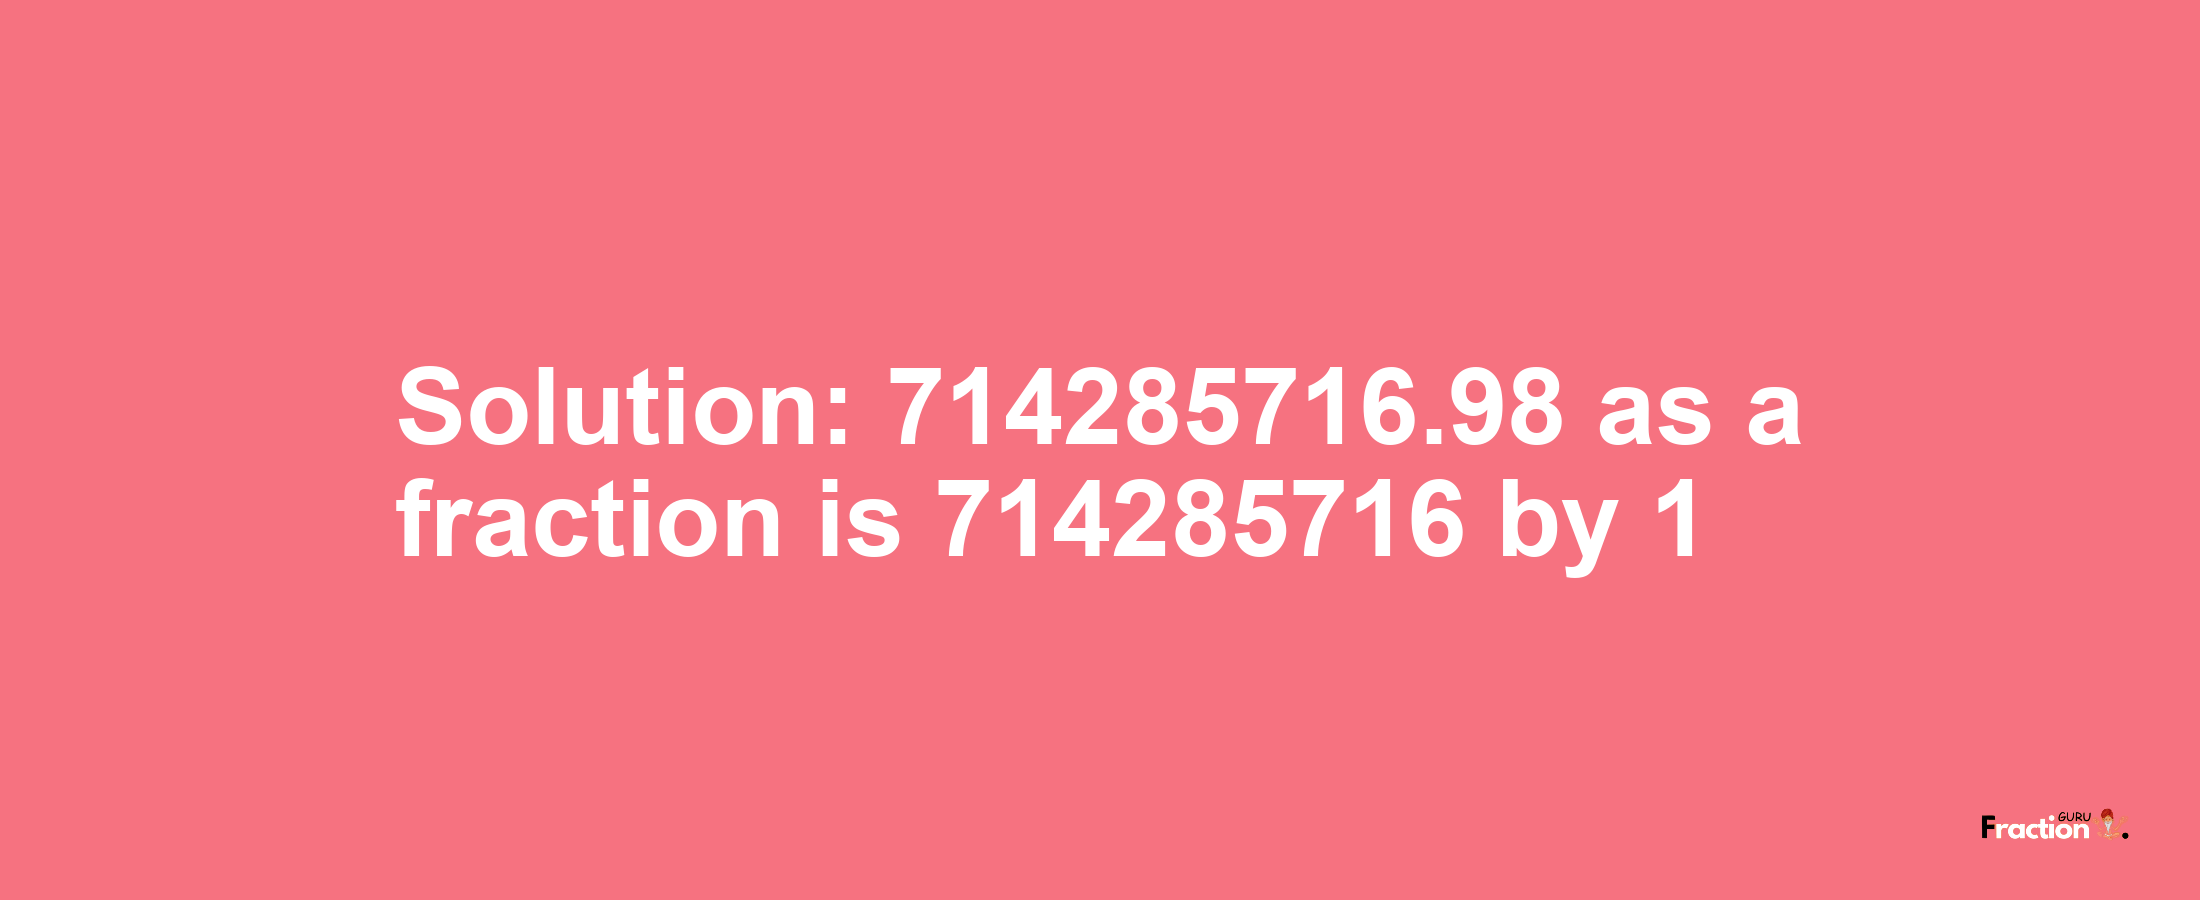 Solution:714285716.98 as a fraction is 714285716/1